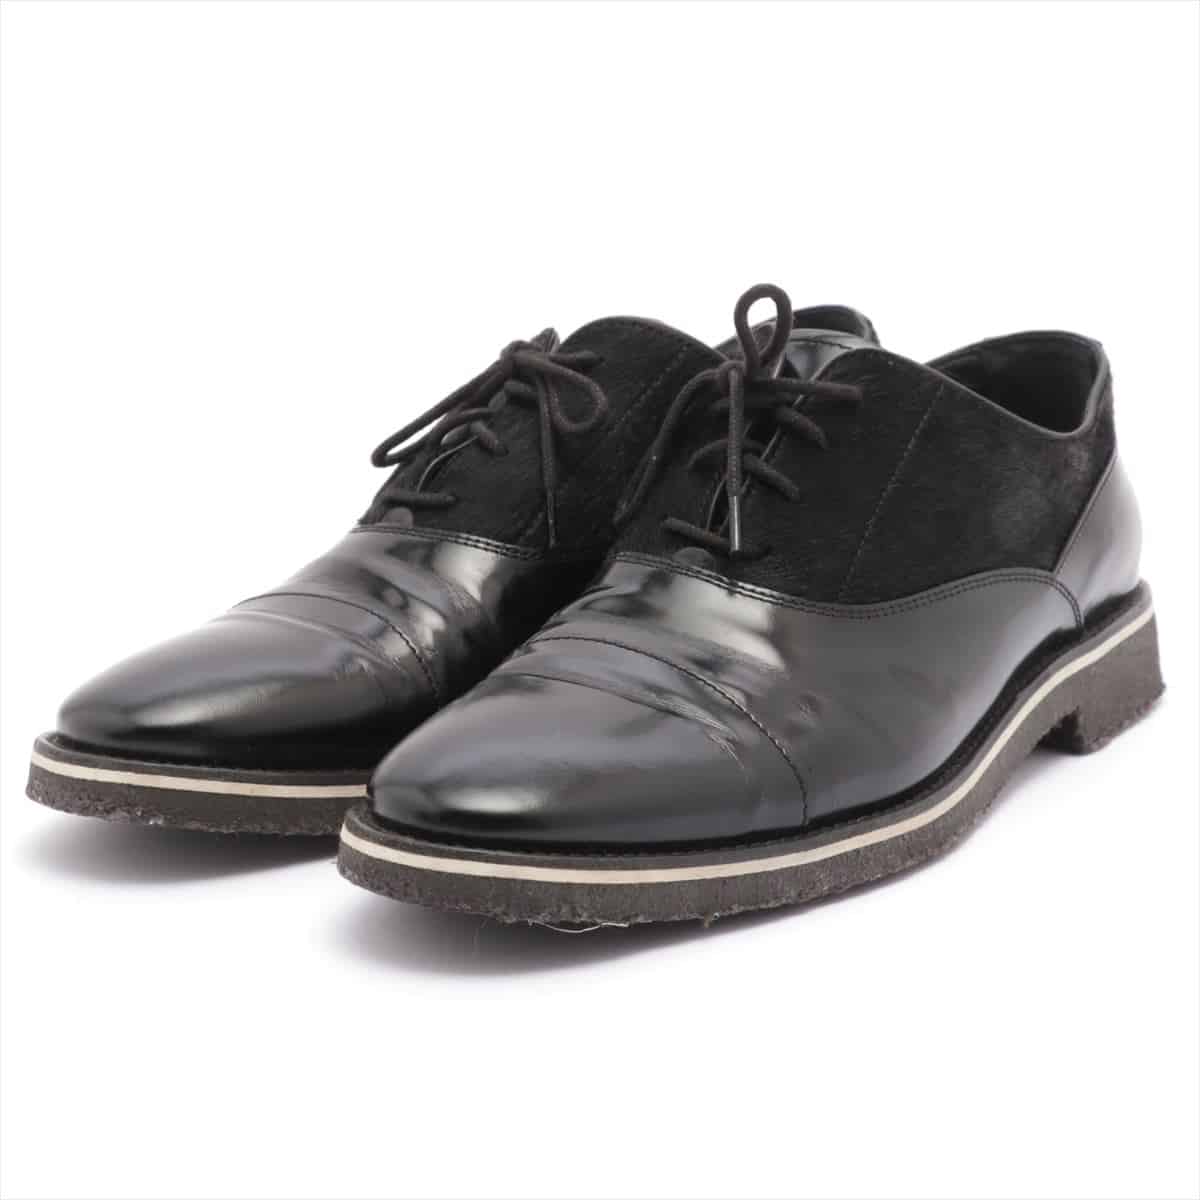 Tod's Leather & Cowhide Leather shoes 9 Men's Black